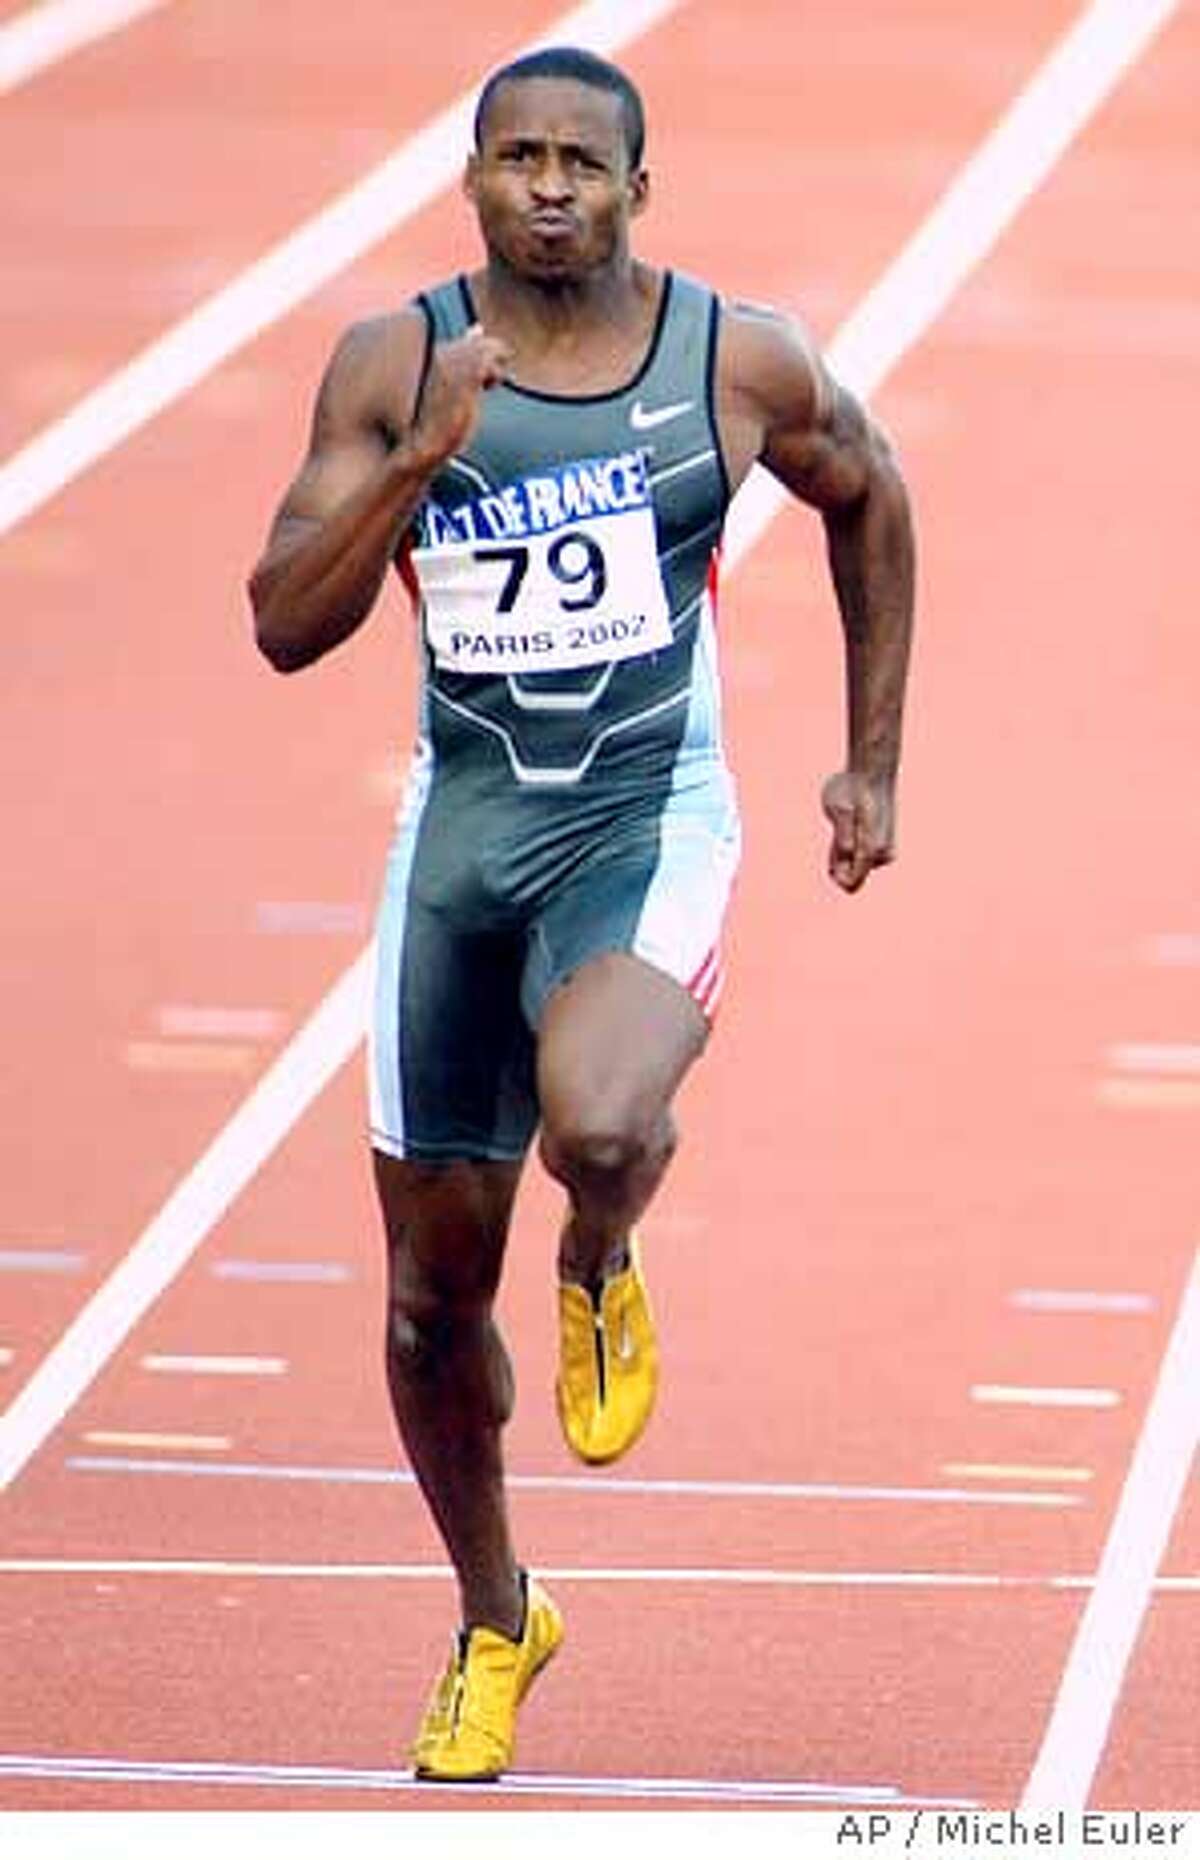 American Tim Montgomery, runs on his way to the new world record of 9.78 seconds in the men's 100m, during the final of the IAAF Grand Prix track and field meeting at the Charlety stadium in Paris, Saturday, Sept. 14, 2002. (AP Photo/Michel Euler) CAT Ran on: 02-21-2005 Sprinters Kelli White (left) and Tim Montgomery say Dr. Brian Goldman helped them obtain performance-enhancing substances. White says Goldman provided her with modafinil, while Montgomery says Goldman wrote a prescription for a drug that boosts testosterone. Ran on: 02-21-2005 Sprinters Kelli White (left) and Tim Montgomery say Dr. Brian Goldman helped them obtain performance-enhancing substances. White says Goldman provided her with modafinil, while Montgomery says Goldman wrote a prescription for a drug that boosts testosterone. Ran on: 02-21-2005 Sprinters Kelli White (left) and Tim Montgomery say Dr. Brian Goldman helped them obtain performance-enhancing substances. White says Goldman provided her with modafinil, while Montgomery says Goldman wrote a prescription for a drug that boosts testosterone.